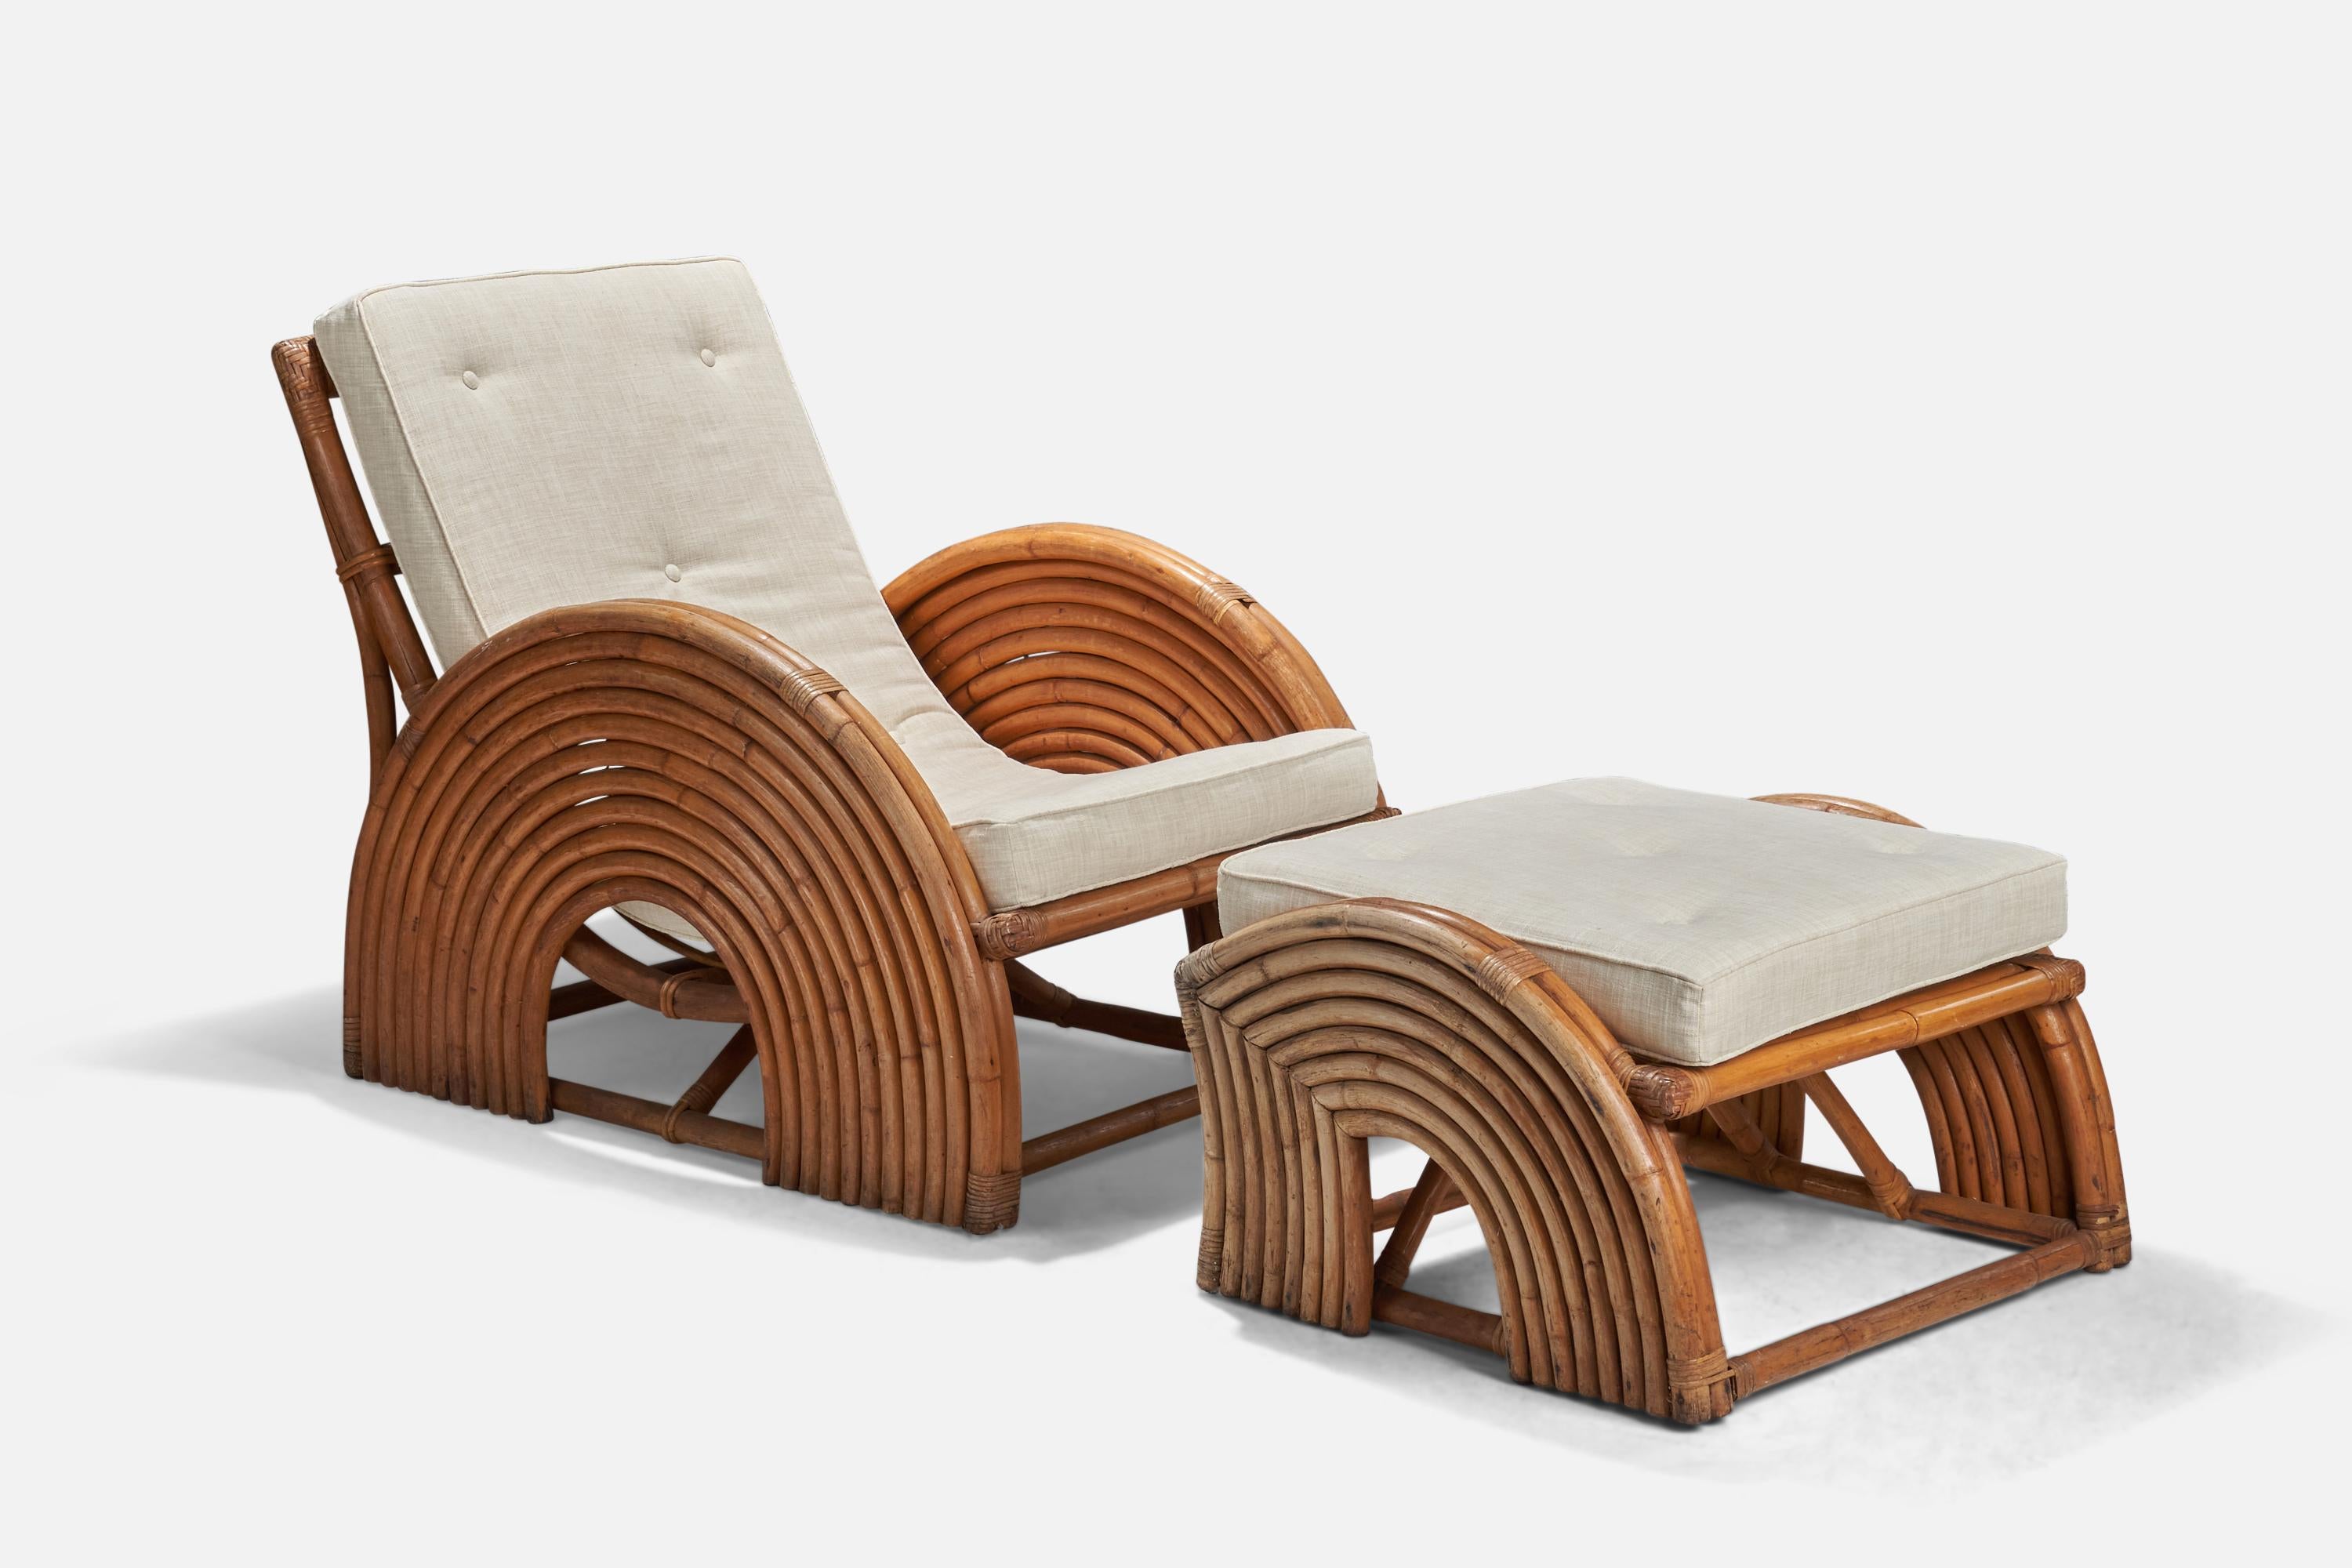 A moulded bamboo, rattan and fabric lounge chair with ottoman designed and produced by an American Designer, USA, 1940s.

Seat 
H = 16.8
W = 27
D = 23.